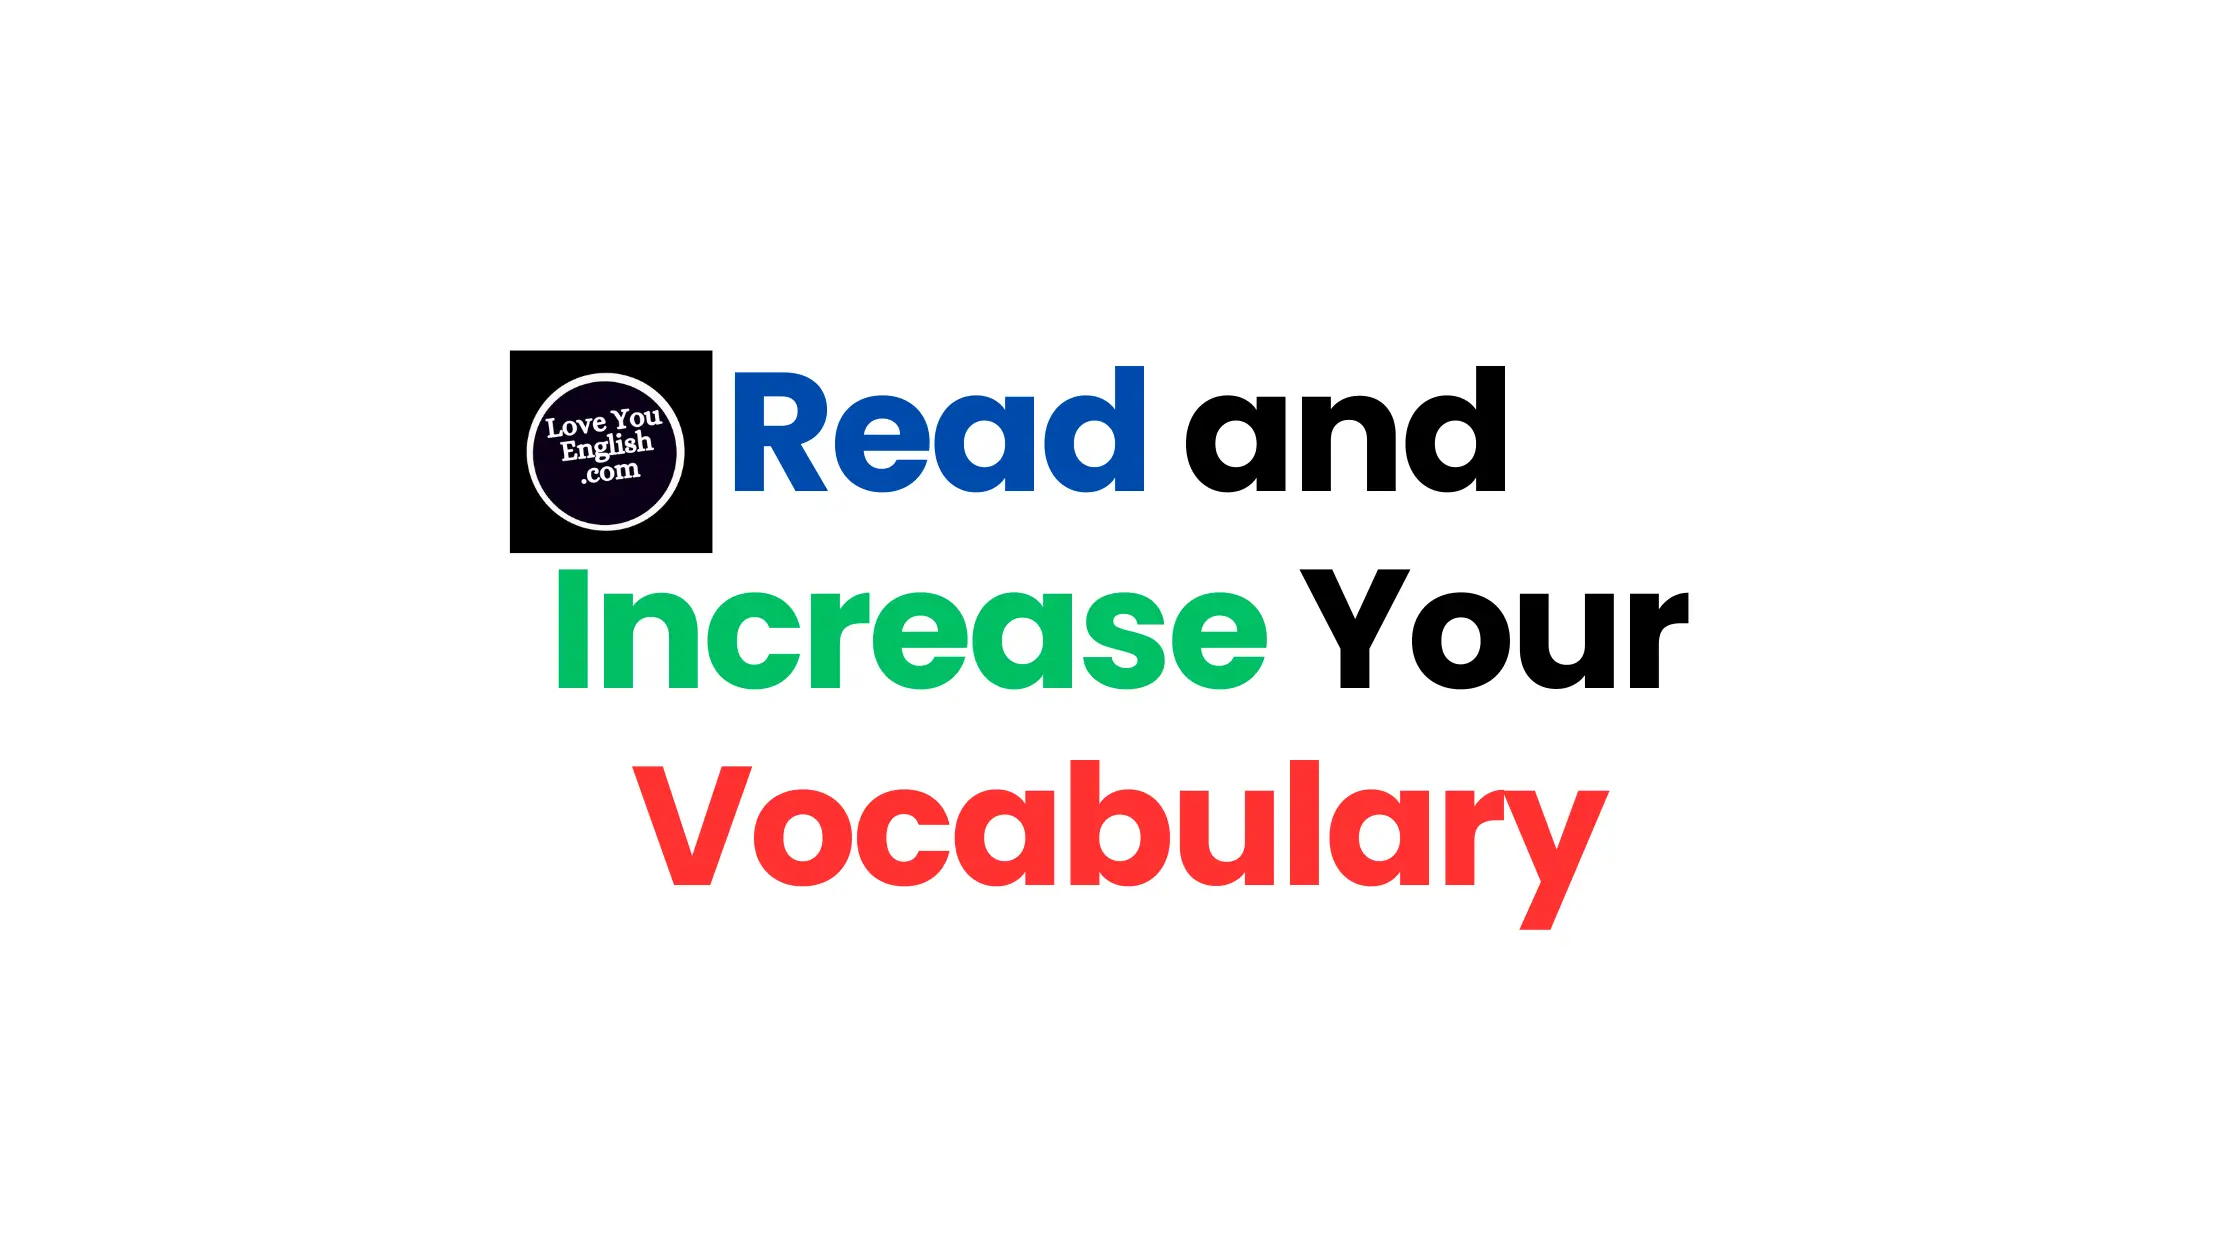 How to Read and Increase Your Vocabulary